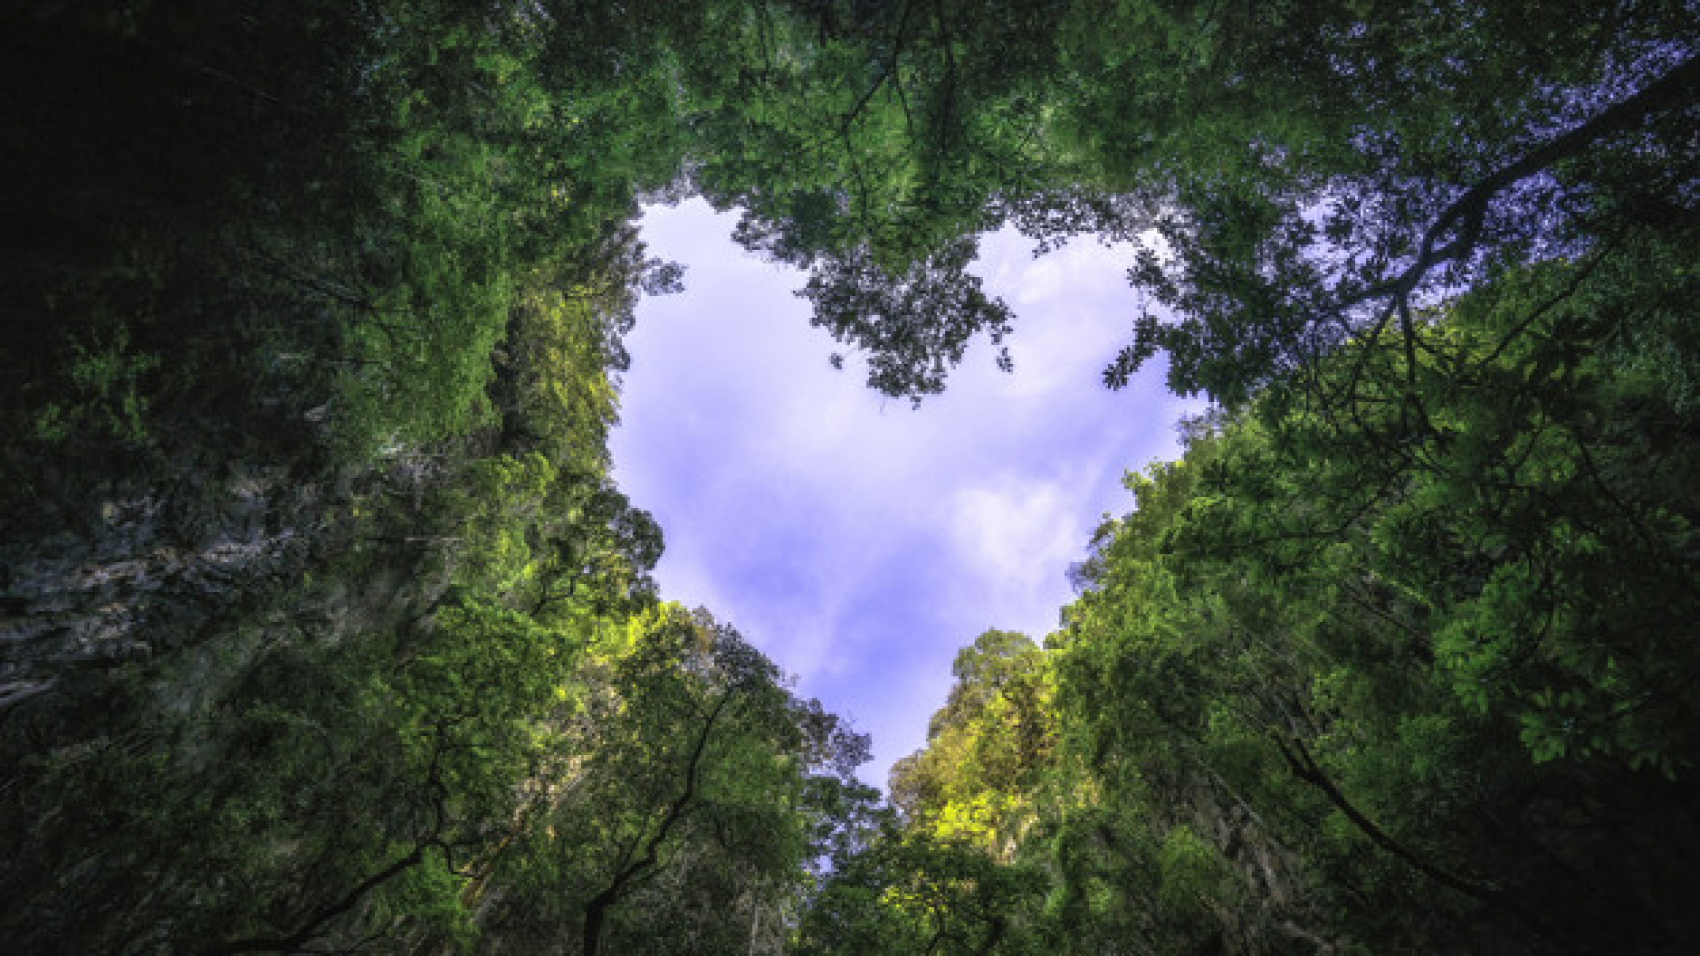 heart-shaped-photography-of-sky-in-the-rain-forest-nature-background_56644-435